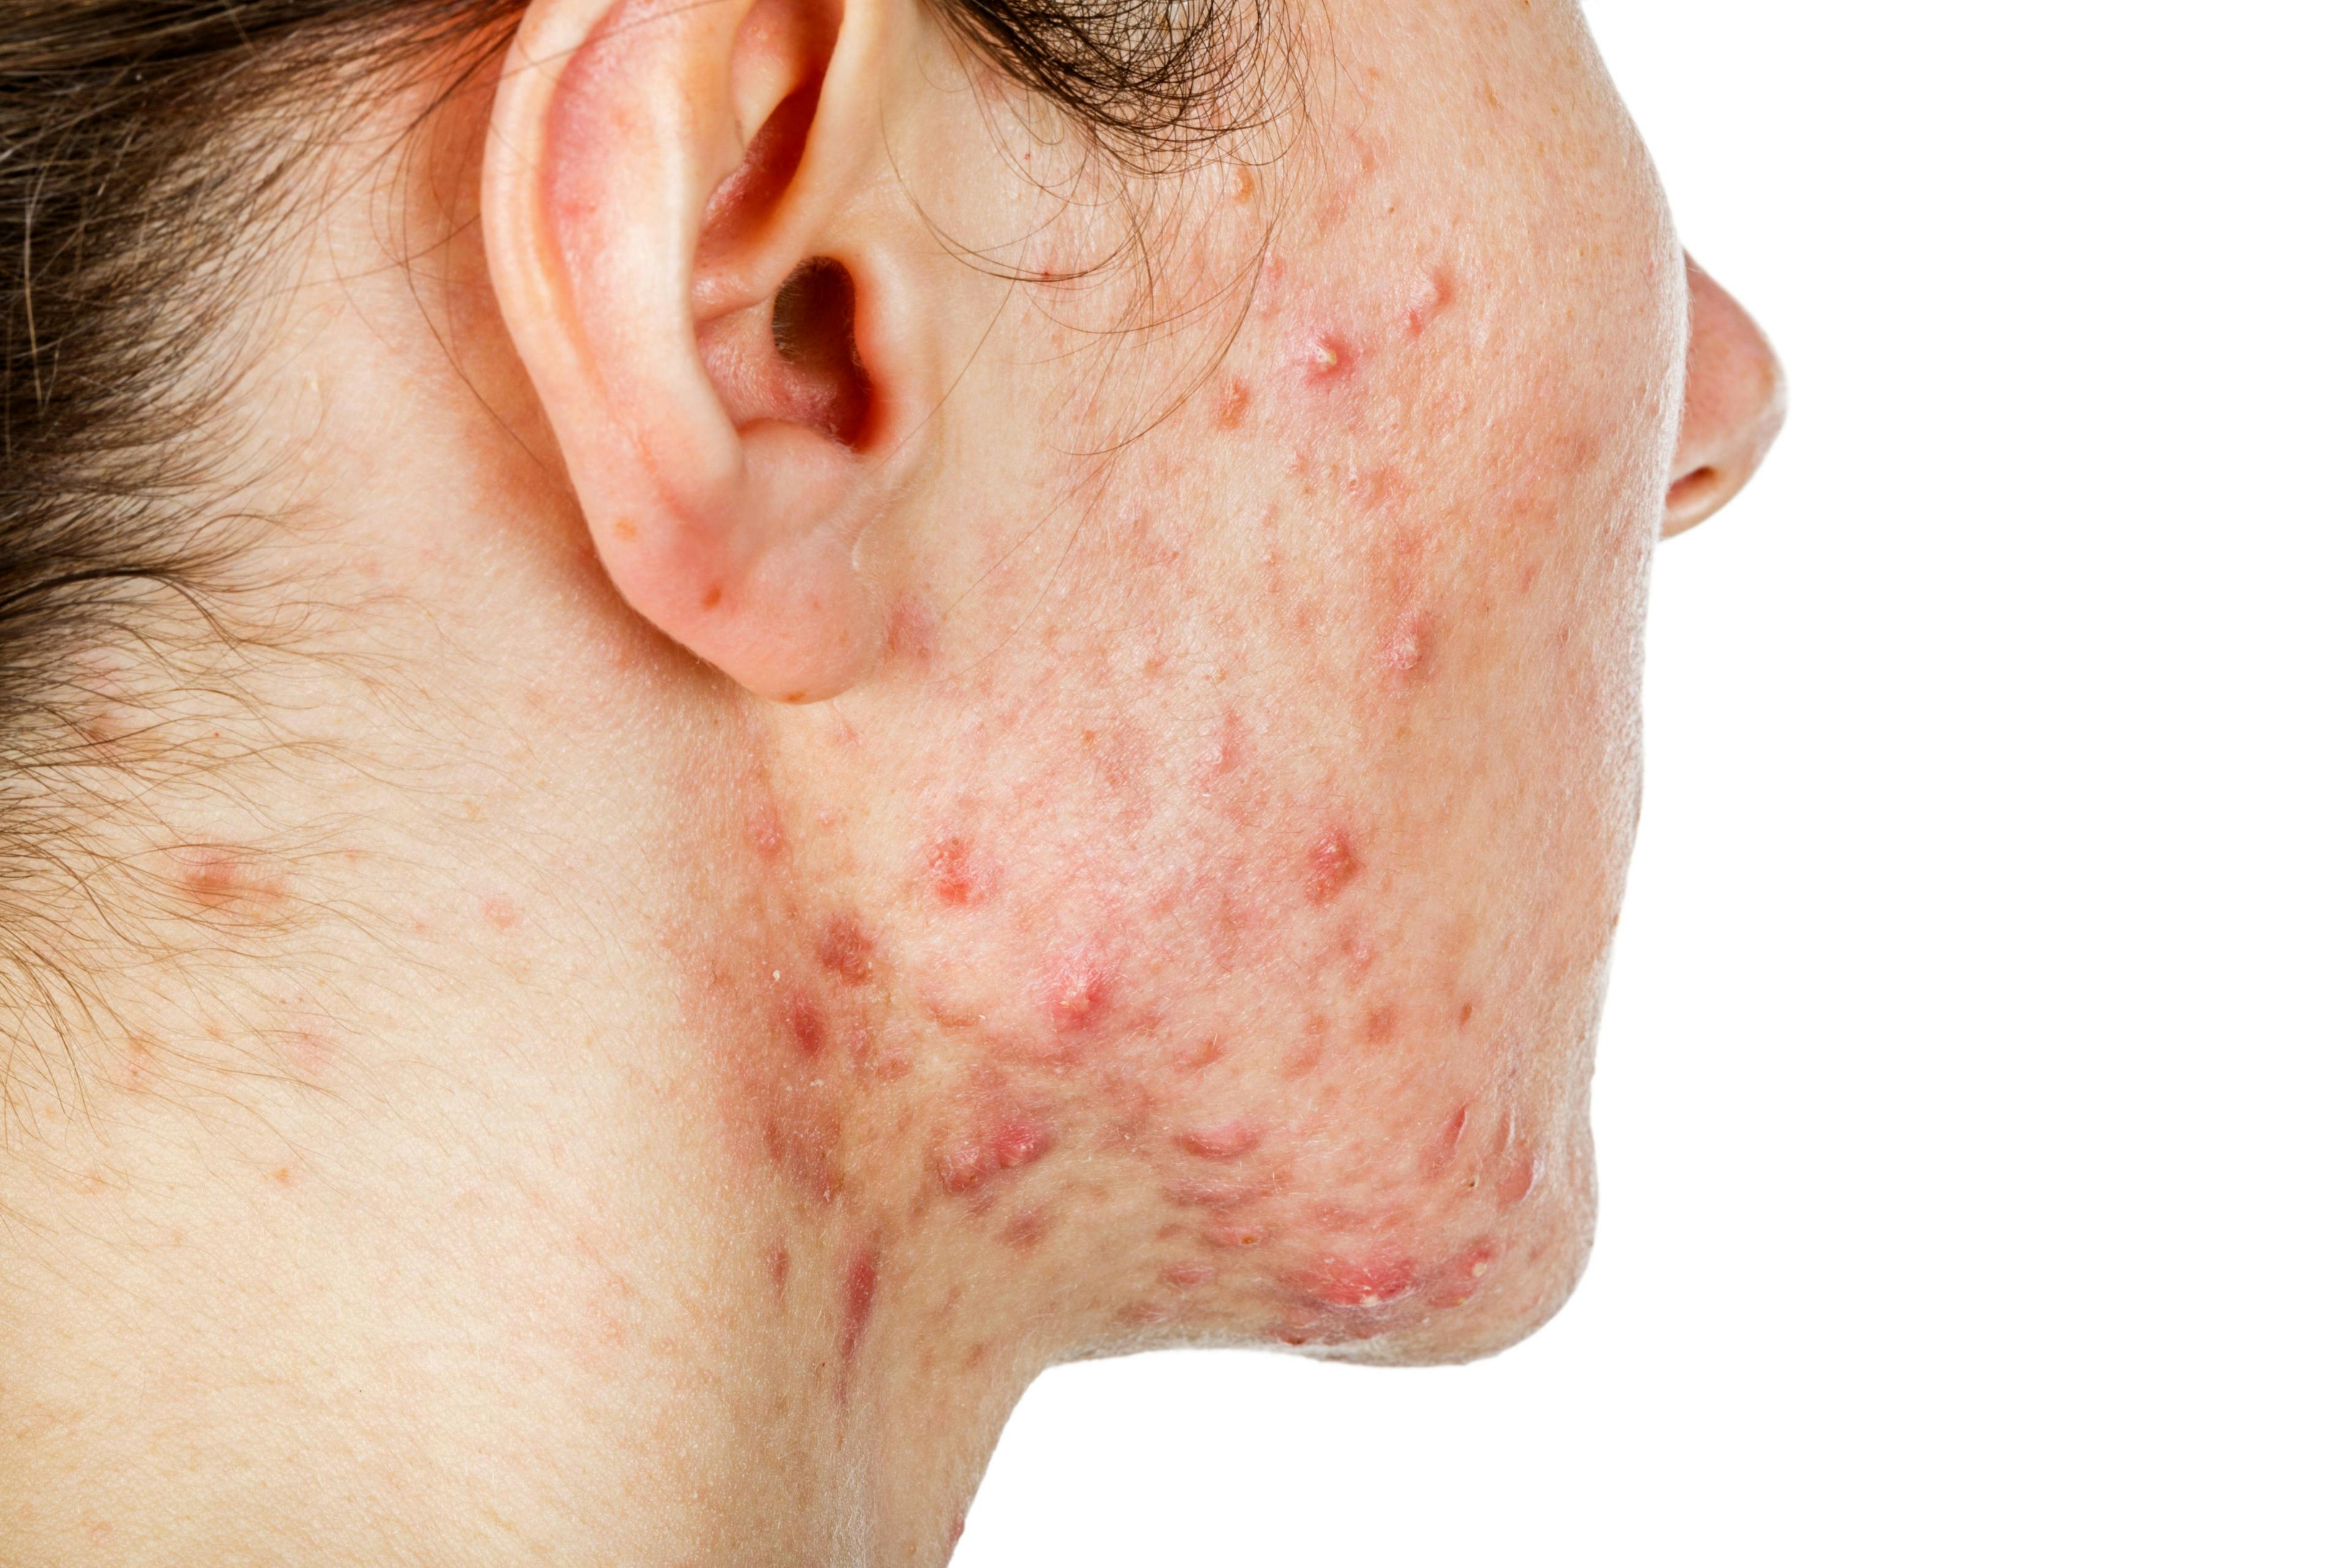 Adult woman with acne | Ocskay Bence - stock.adobe.com